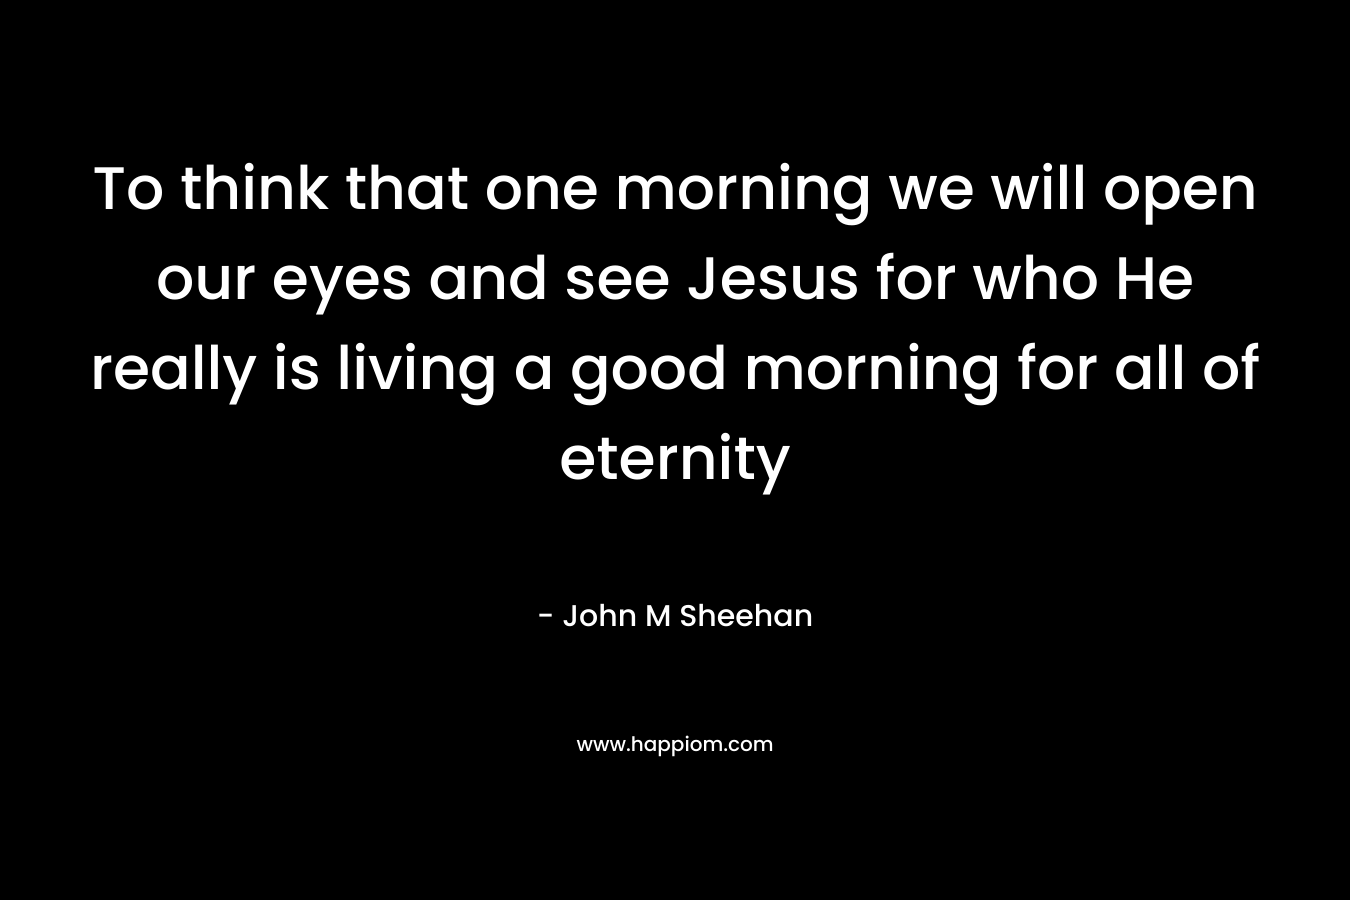 To think that one morning we will open our eyes and see Jesus for who He really is living a good morning for all of eternity